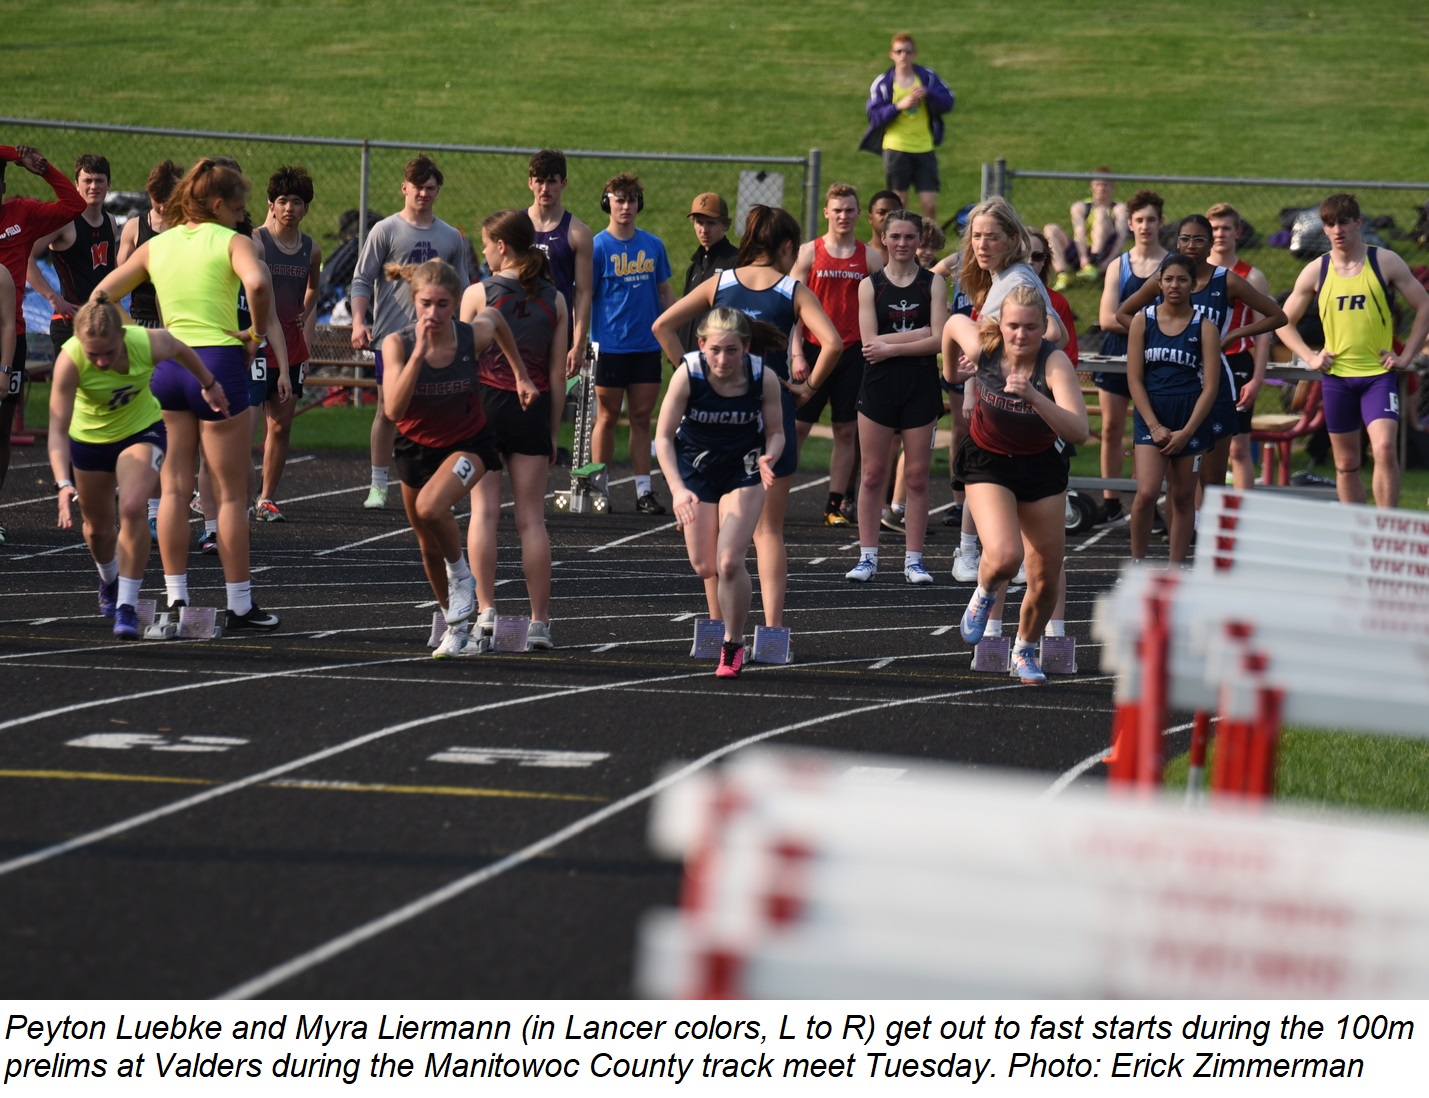 Peyton Luebke and Myra Liermann get out to fast starts at the start of the 100m prelims Tuesday in Valders.